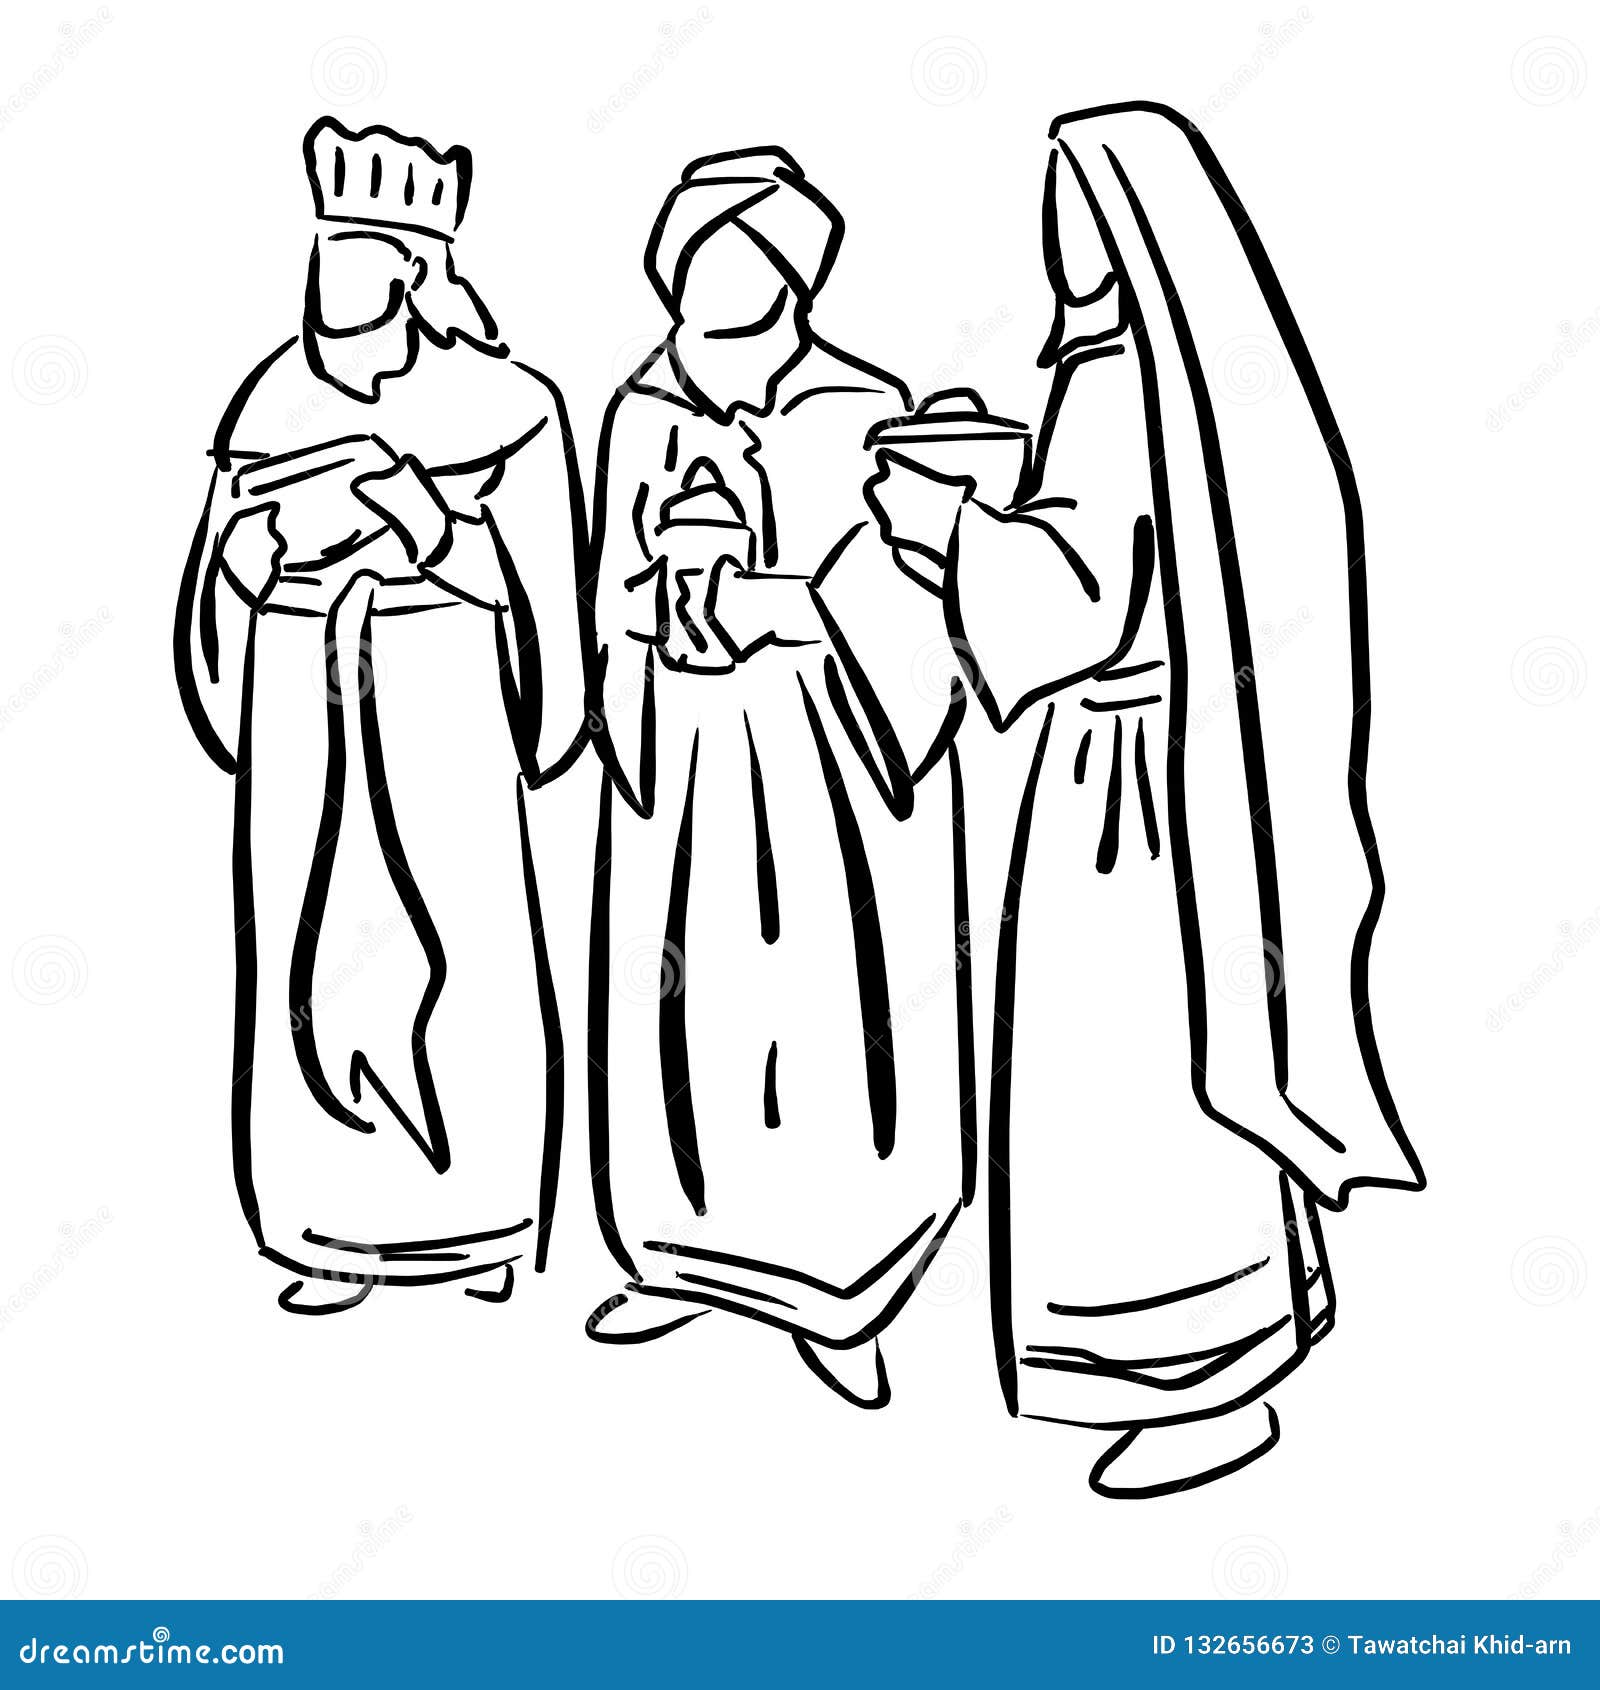 Three Kings or Three Wise Men coloring pages printable games